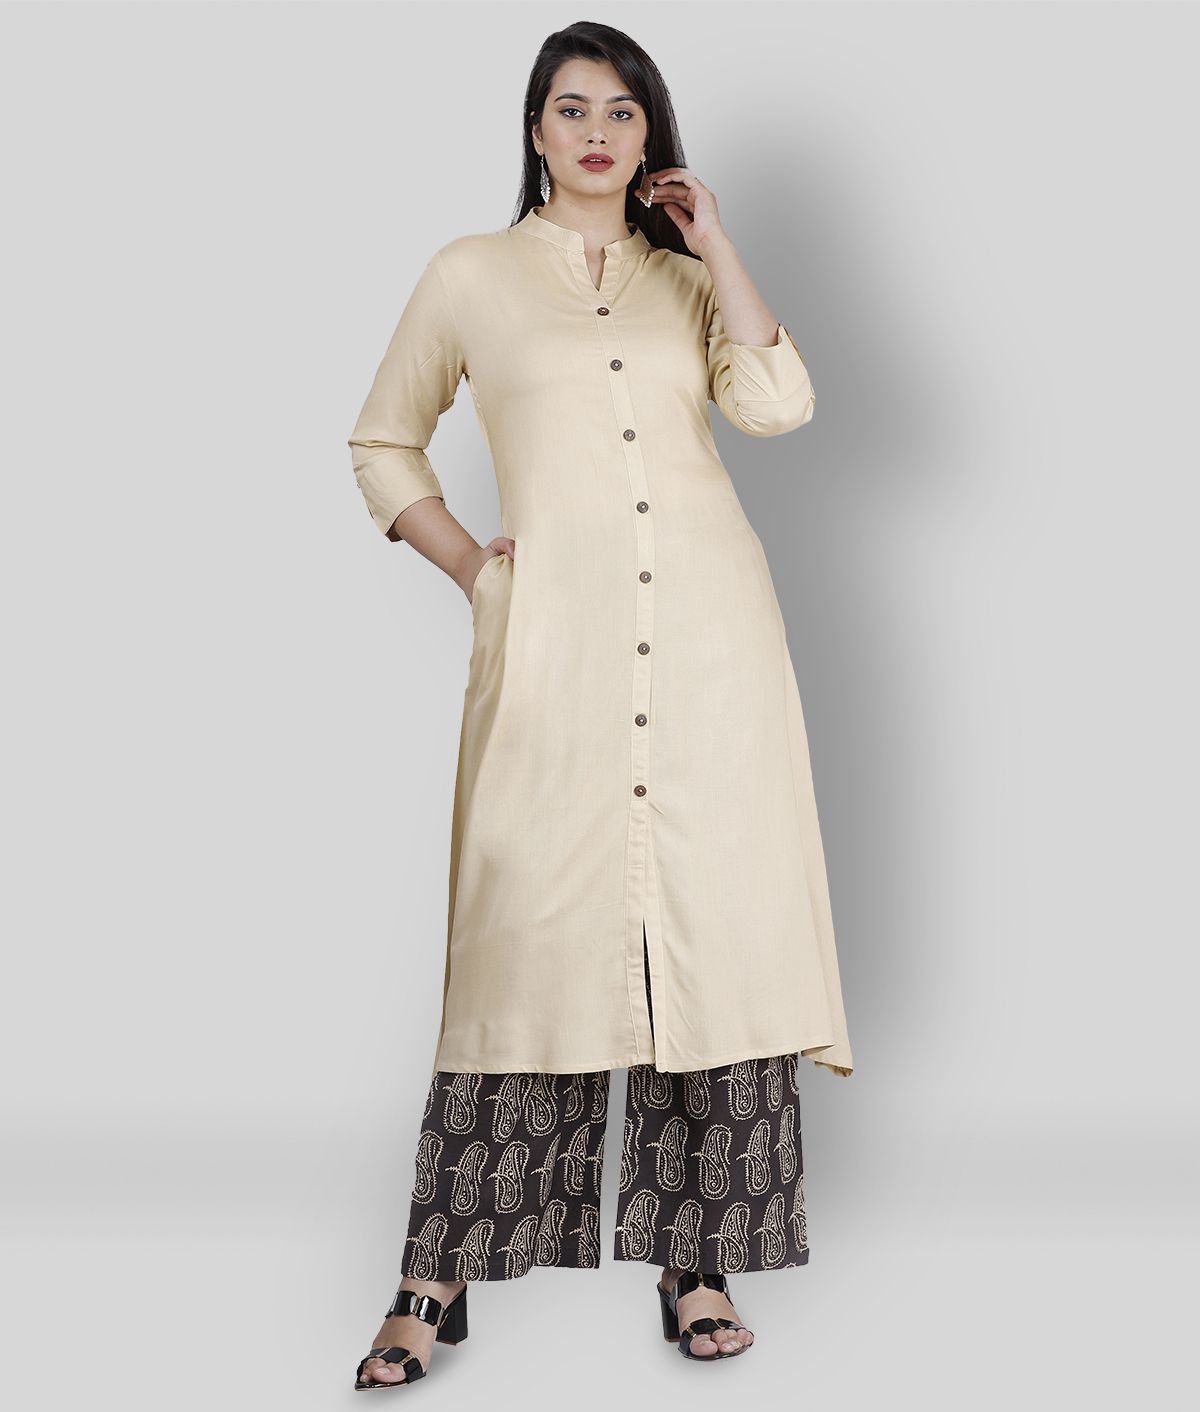     			MAUKA - Beige Front Slit Rayon Women's Stitched Salwar Suit ( Pack of 1 )